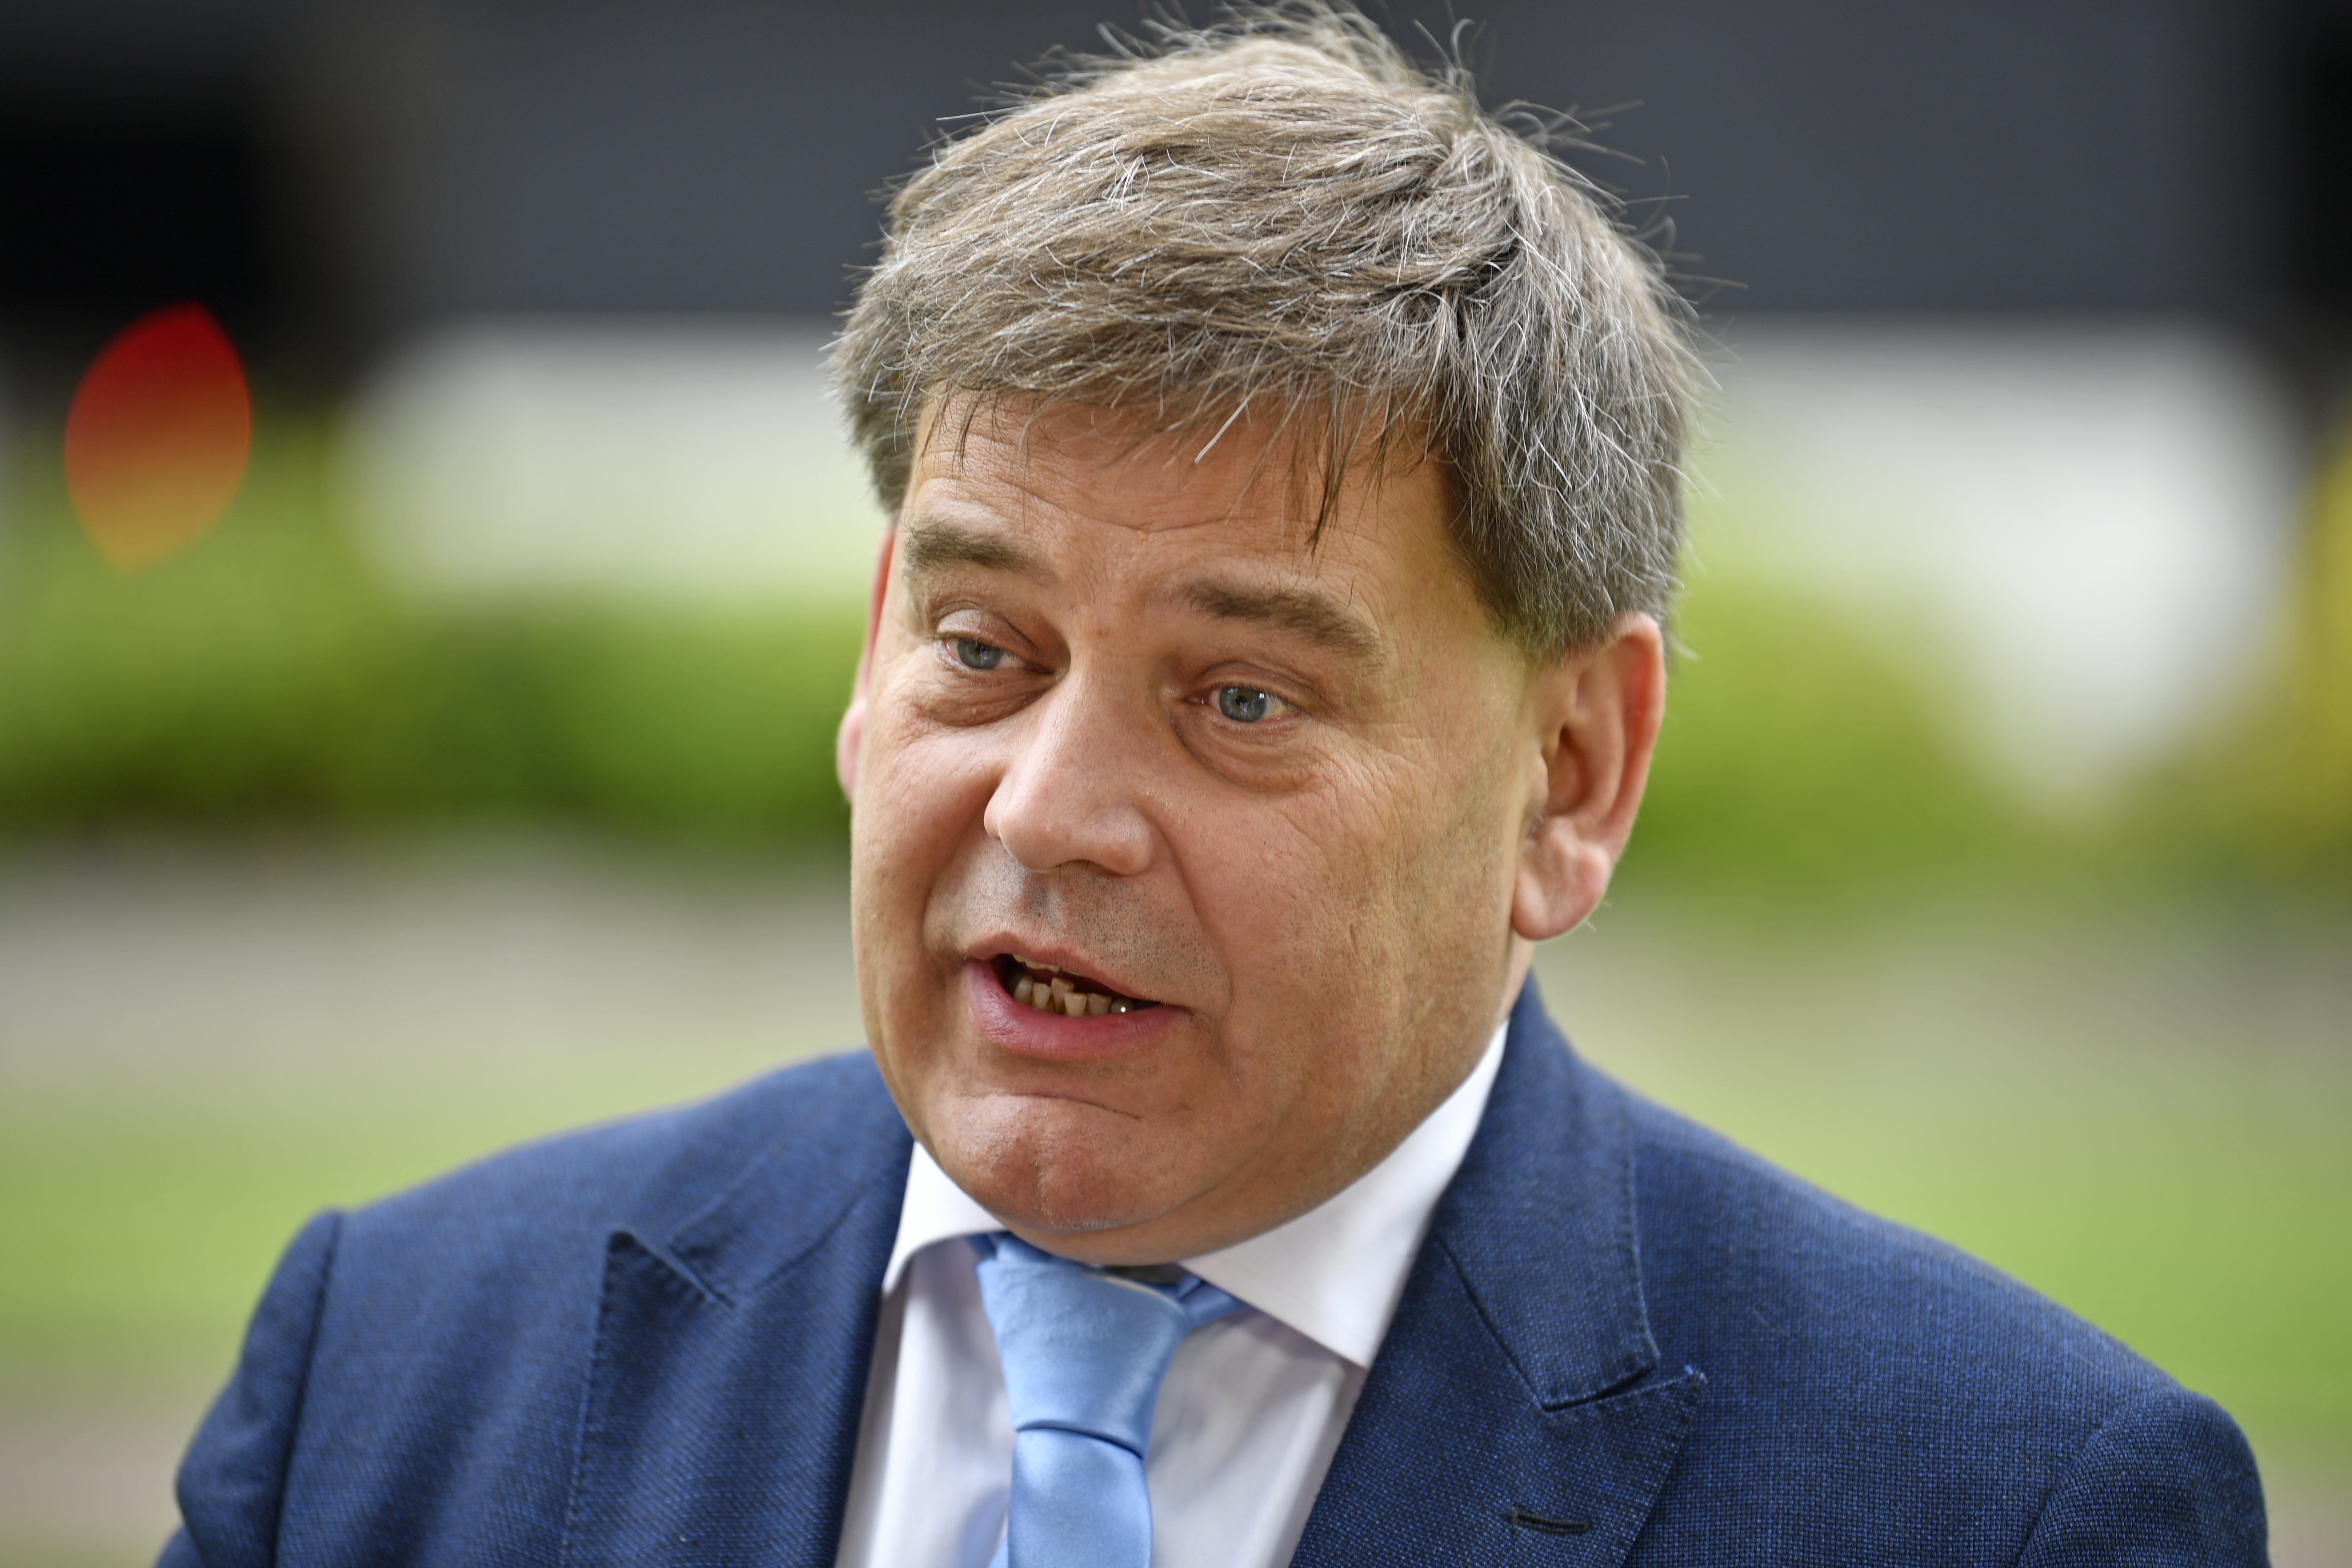 Andrew Bridgen MP emailed Kathryn Stone about the extraordinary claim